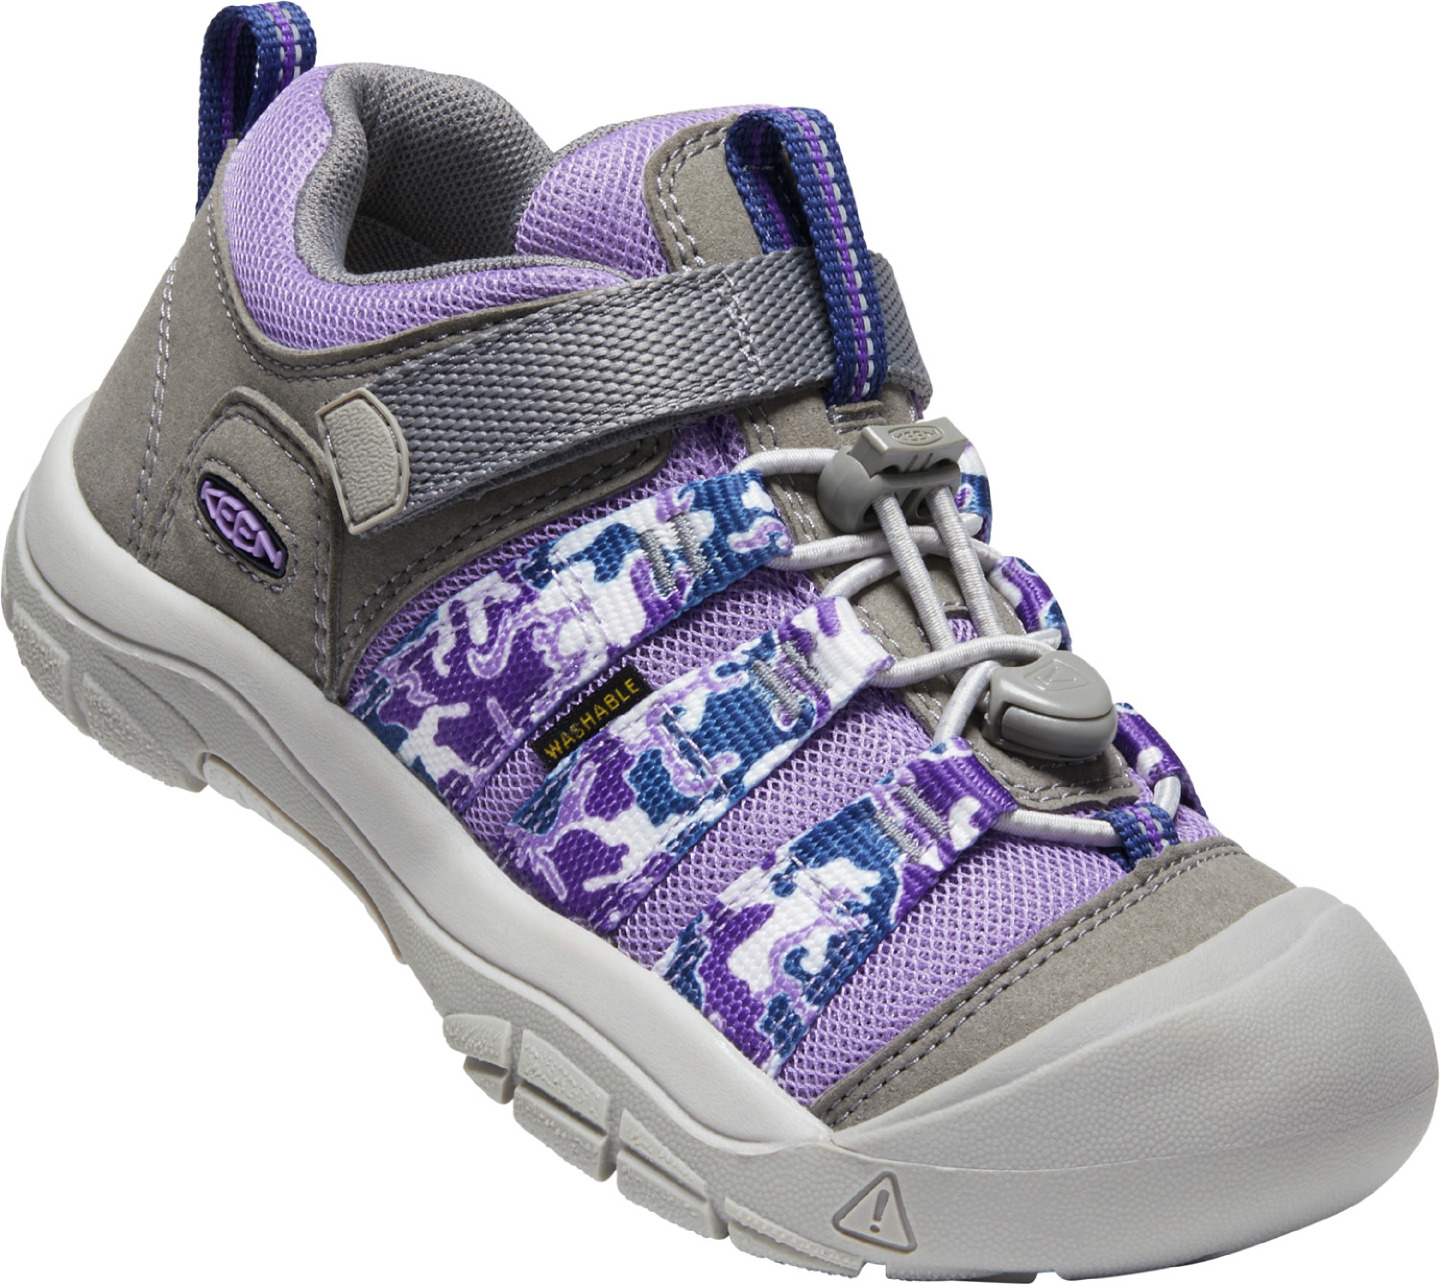 Boty Keen NEWPORT H2SHO YOUTH chalk violet/drizzle US 2